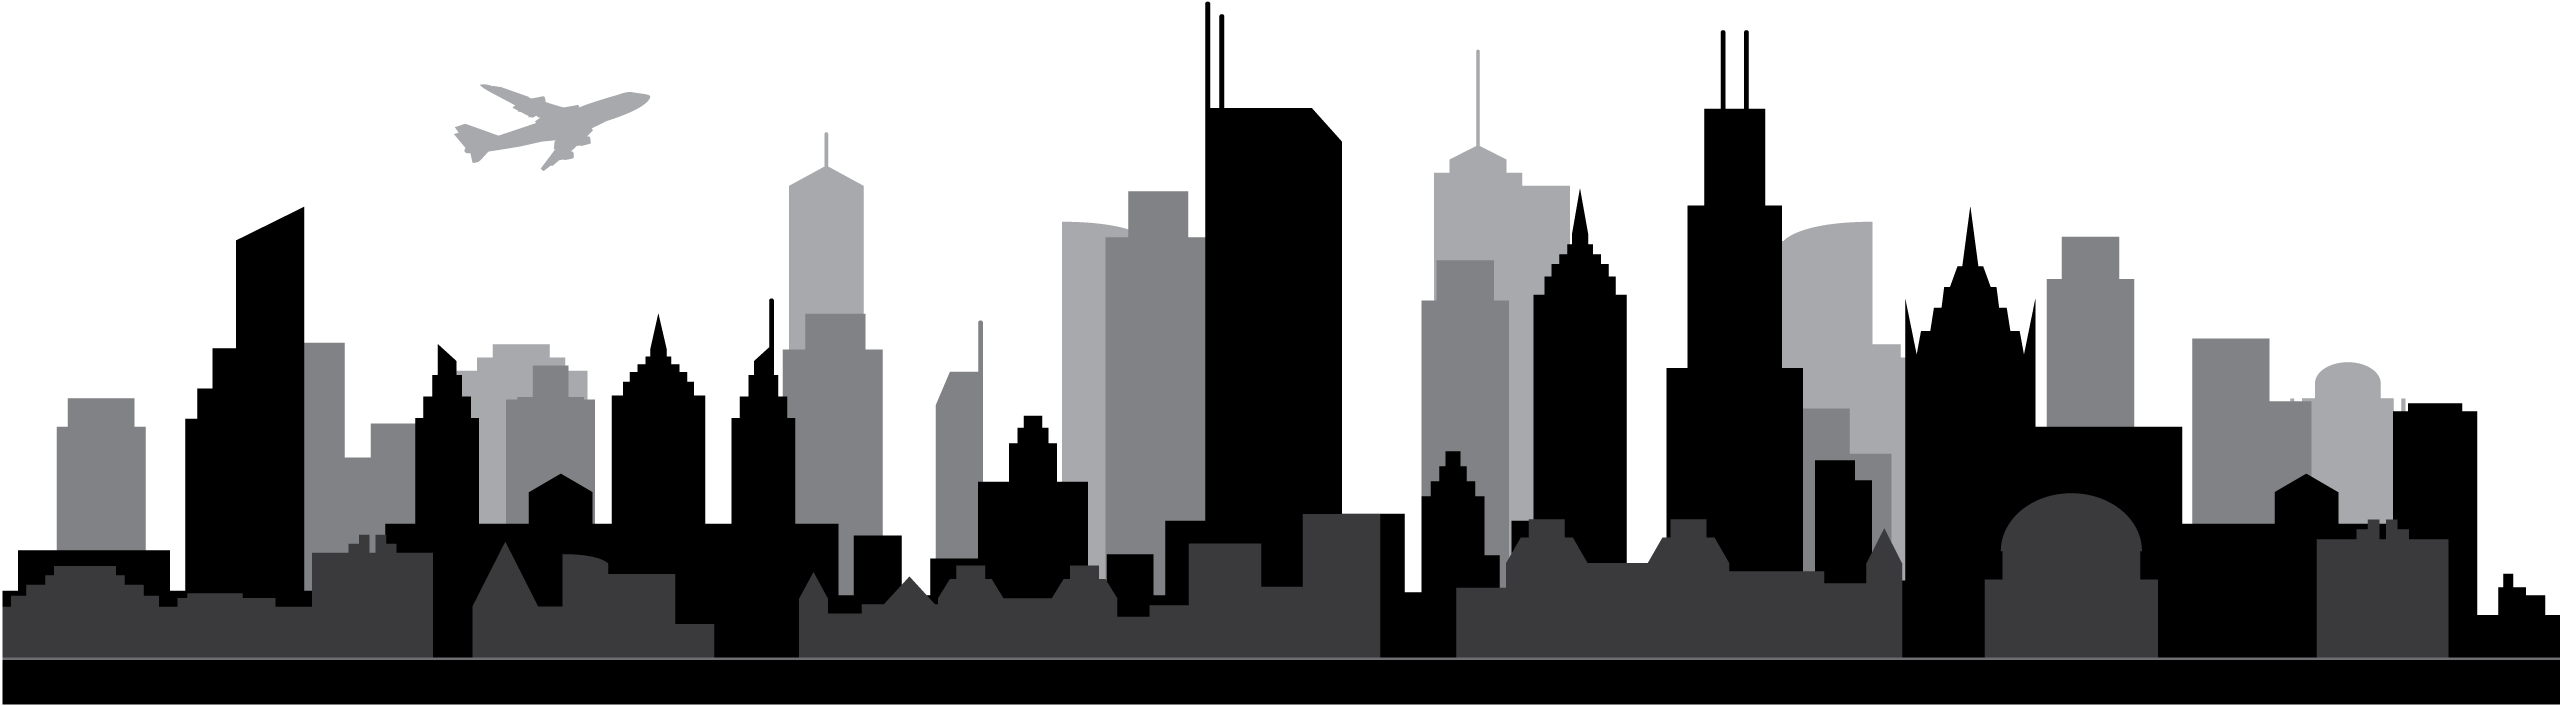 chicago skyline silhouette png
